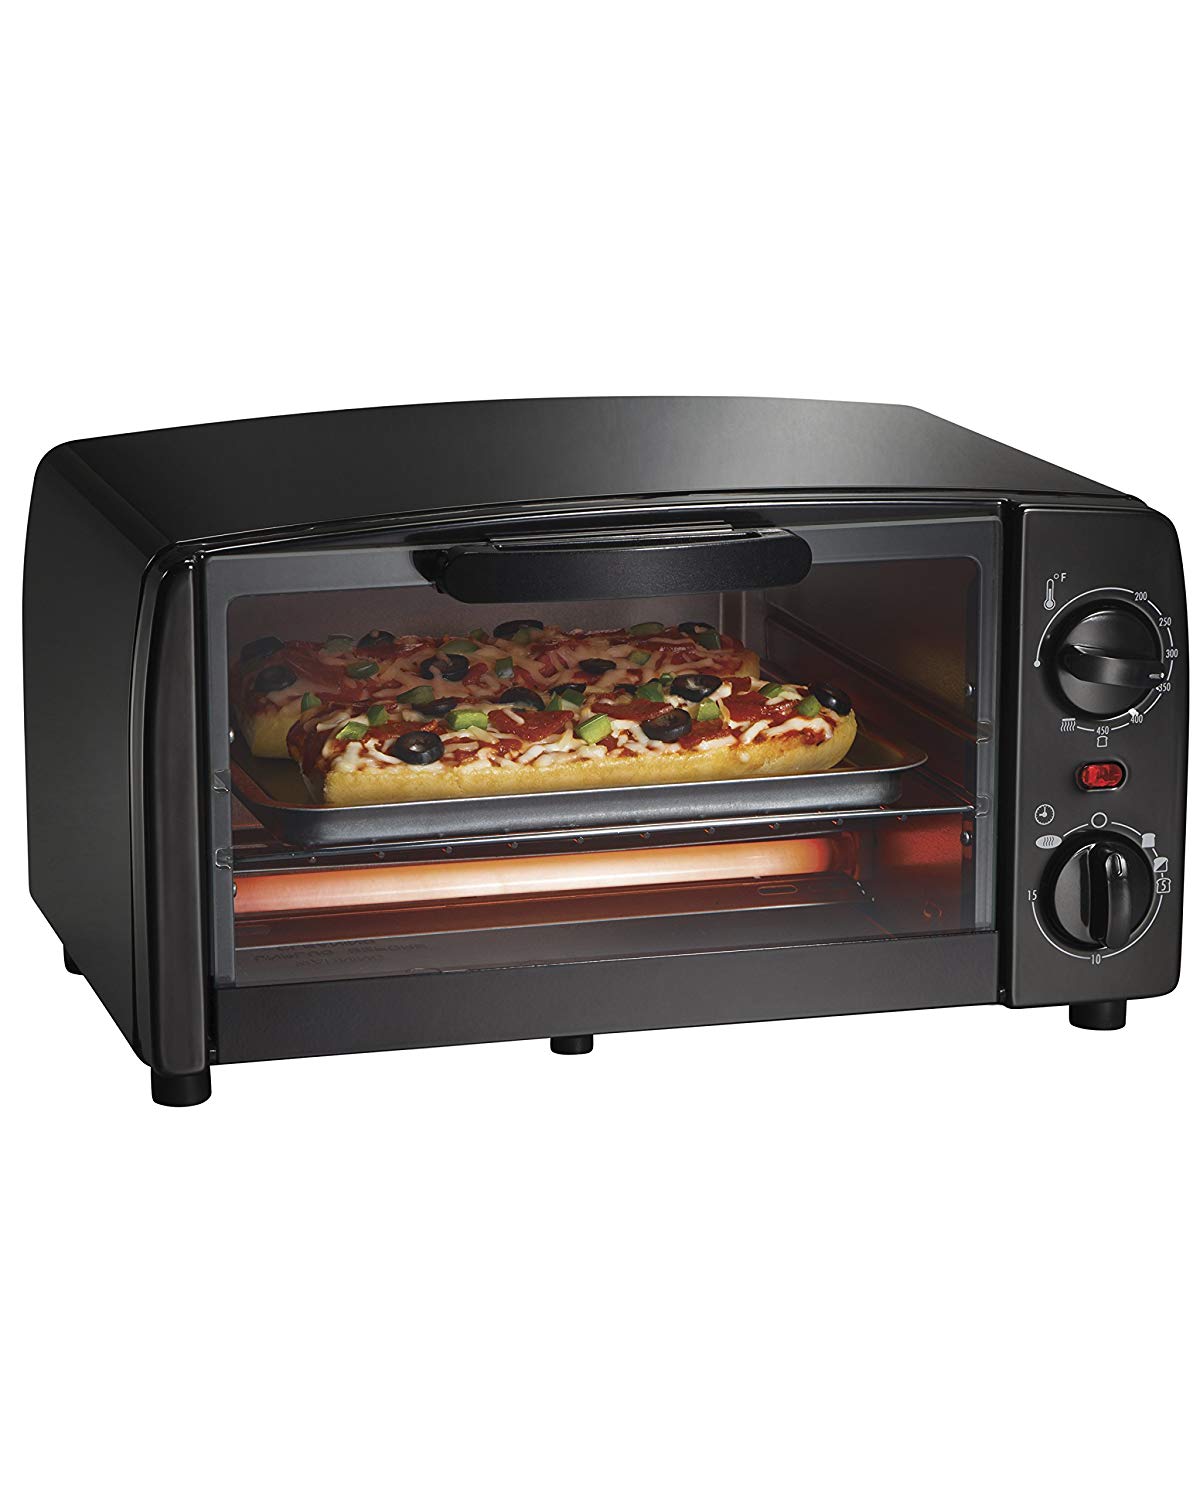 An image related to Hamilton Beach Proctor Silex 31118R Black Four Slice Toaster Oven